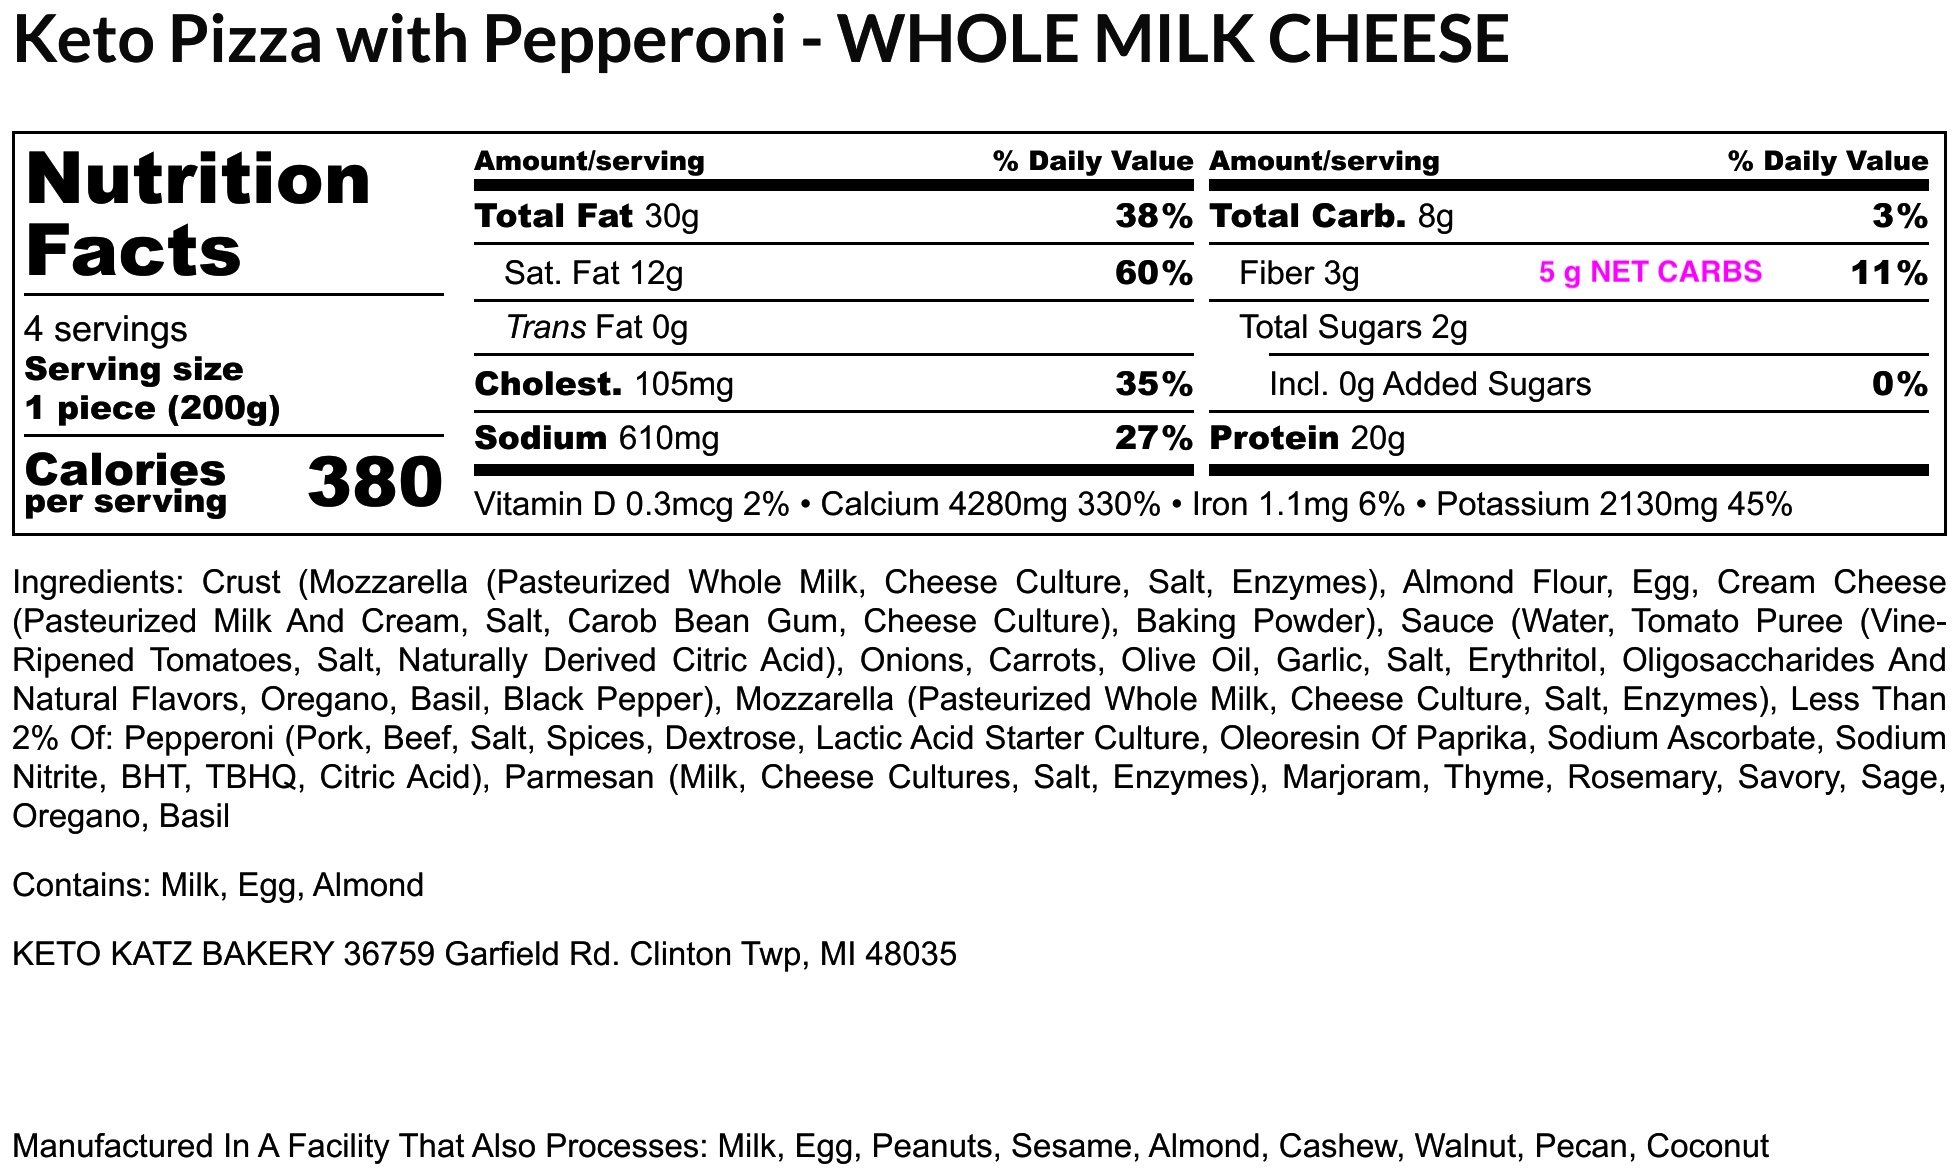 Keto Pizza with Pepperoni - WHOLE MILK CHEESE - Nutrition Label copy 2.jpg